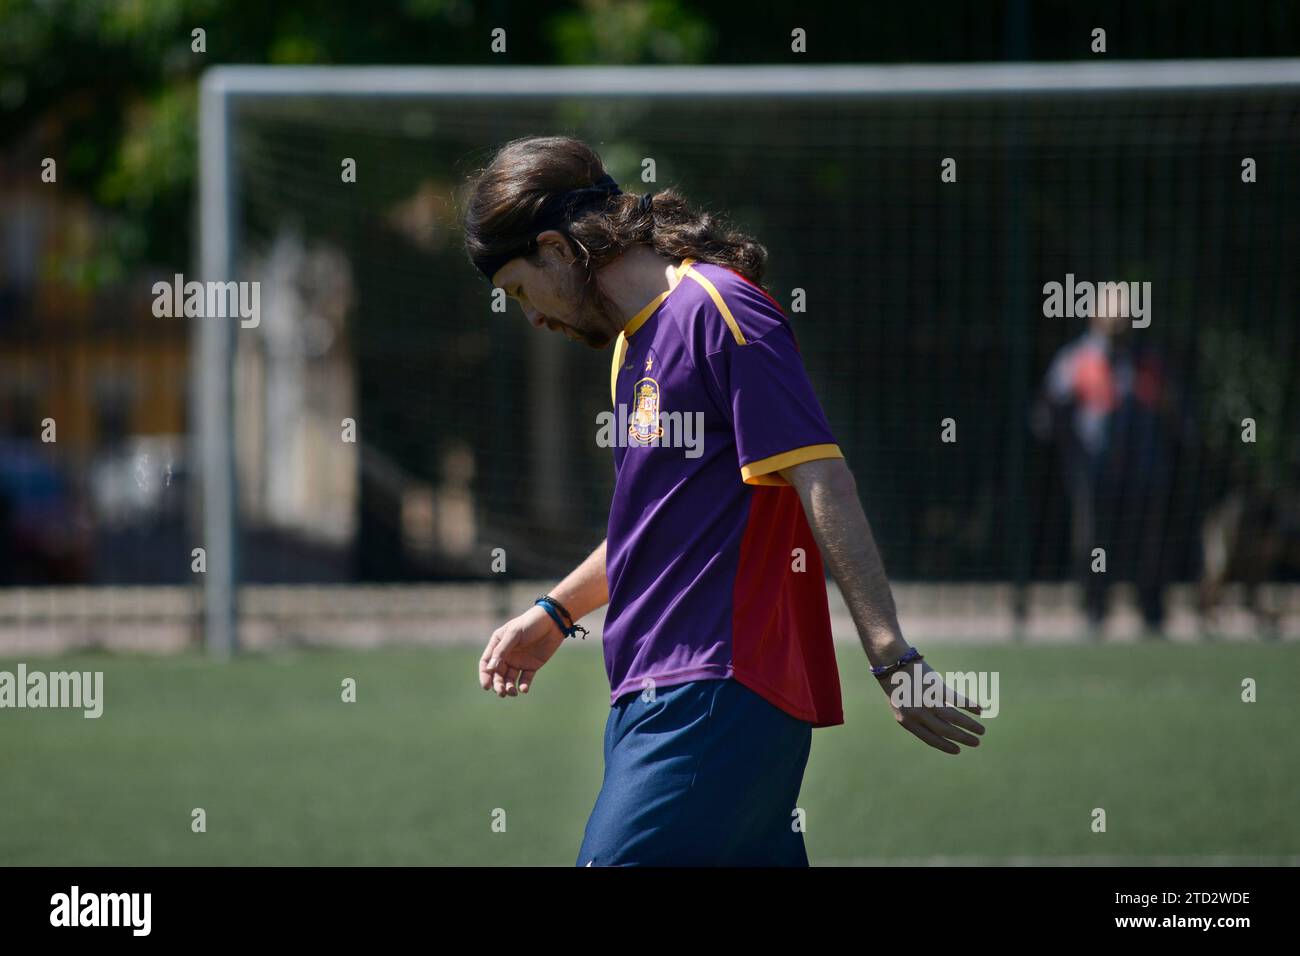 Madrid, 05/23/2015. Members of Podemos played a football game on the day of electoral reflection. In the image, Pablo Iglesias with a Spain shirt with the colors of the Second Republic. Photo: Maya Balanya ARCHDC. Credit: Album / Archivo ABC / Maya Balanya Stock Photo